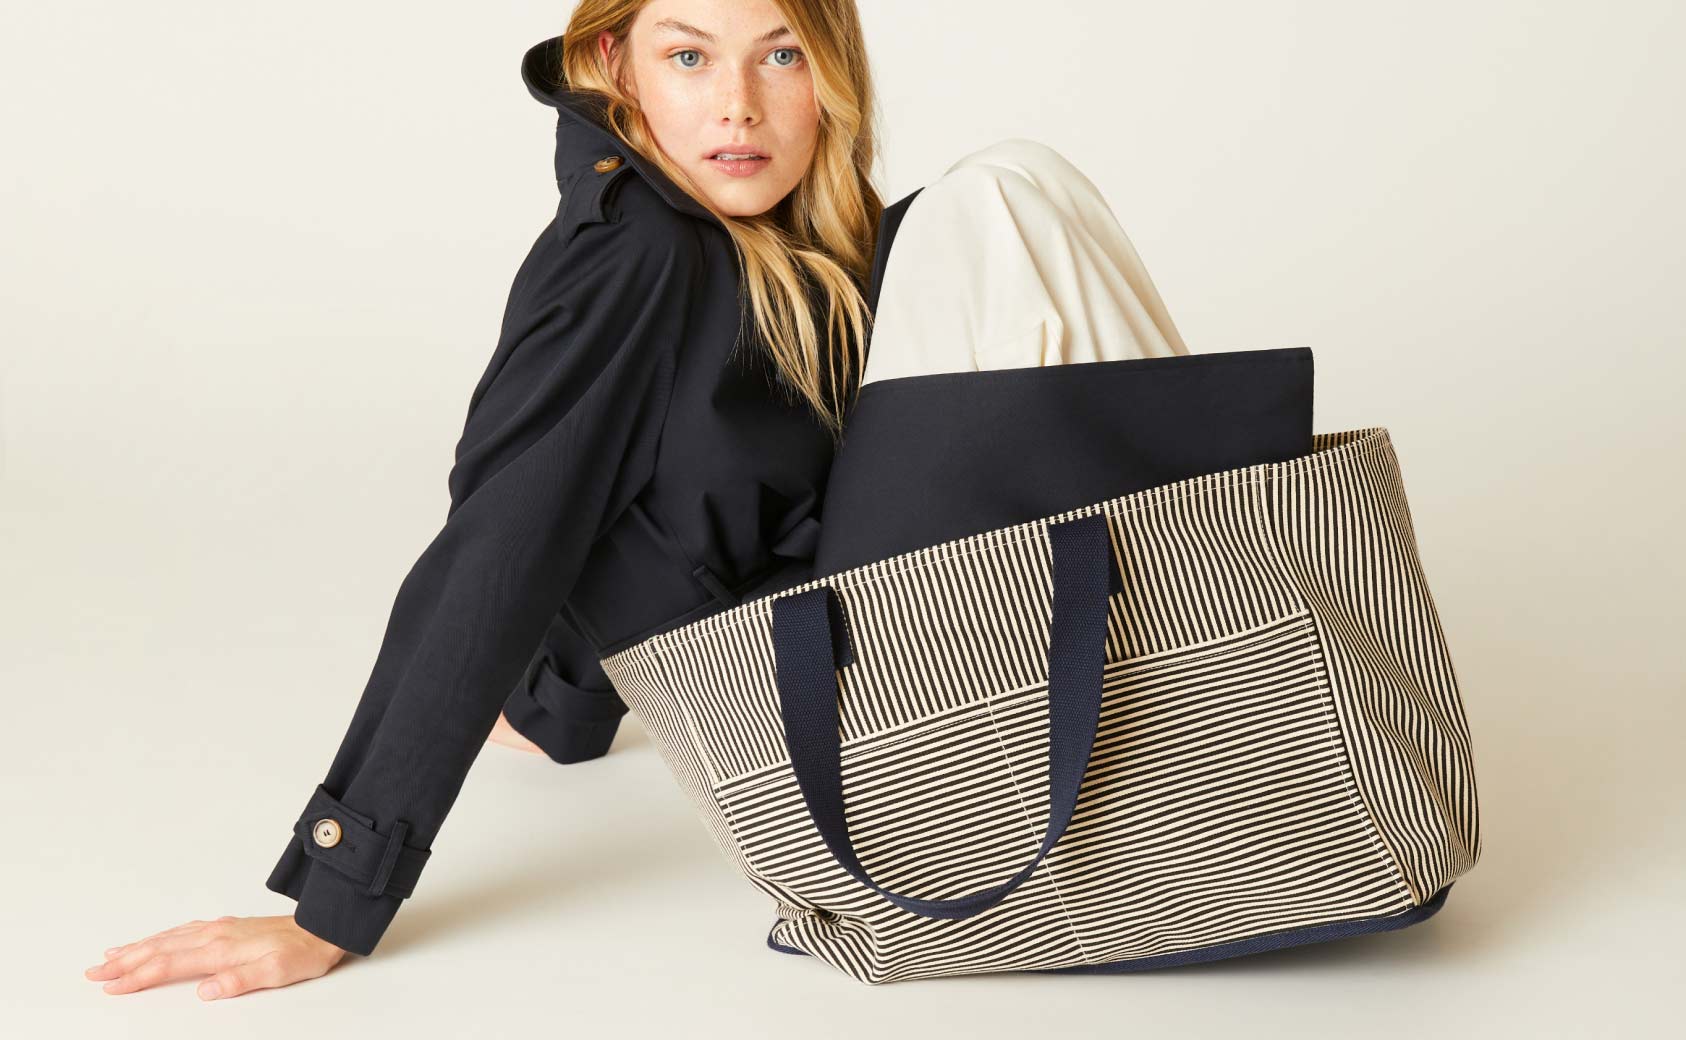 Get a Carry-all Tote Bag for $20 when you spend $30 or more. While quantities last.